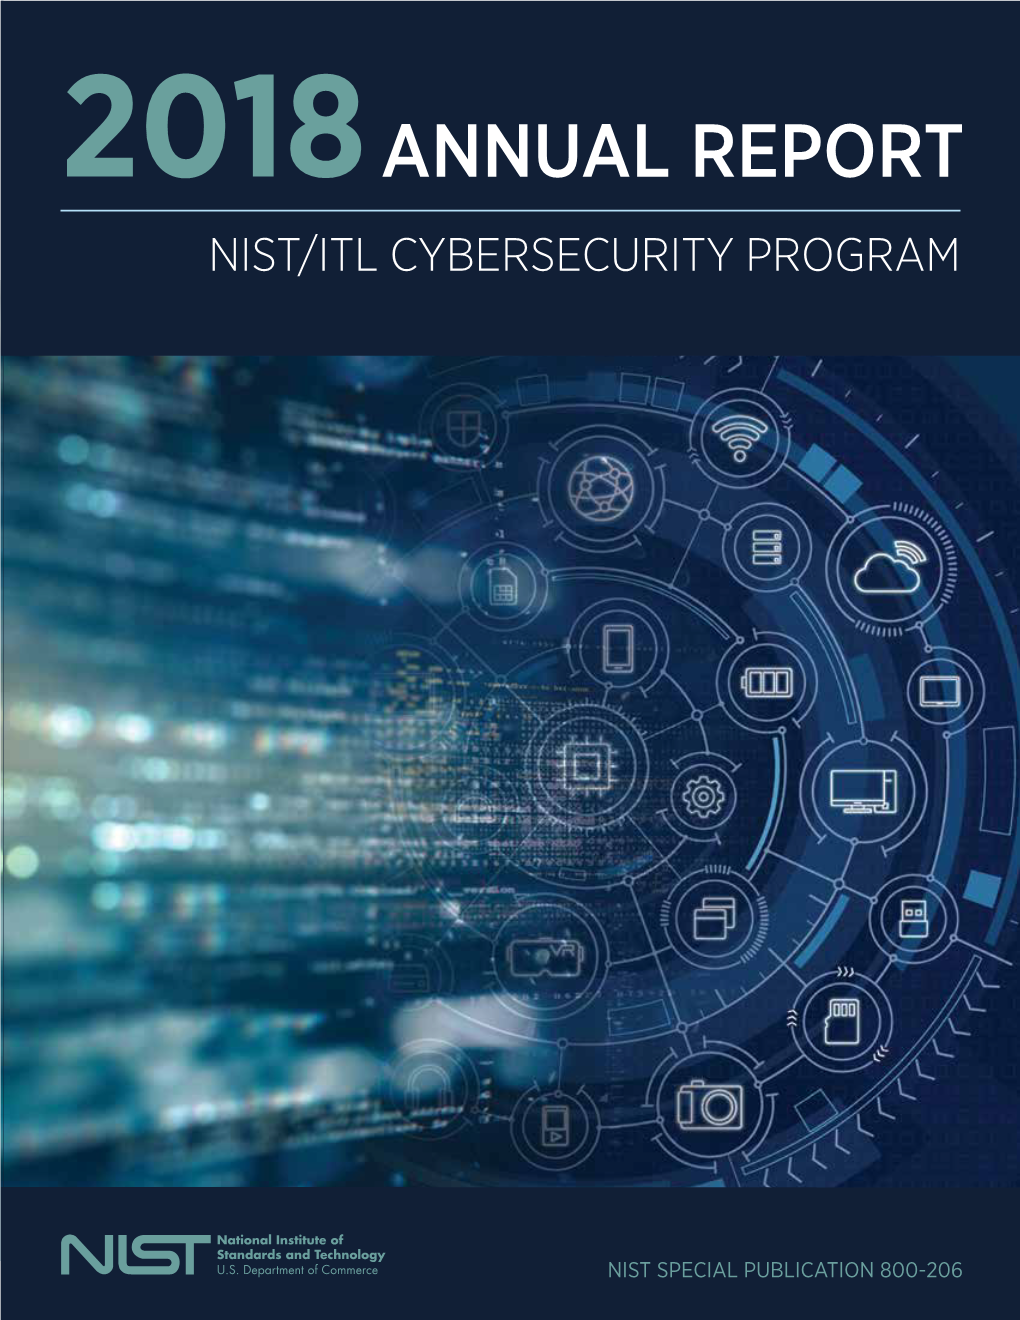 Annual Report 2018: NIST/ITL Cybersecurity Program